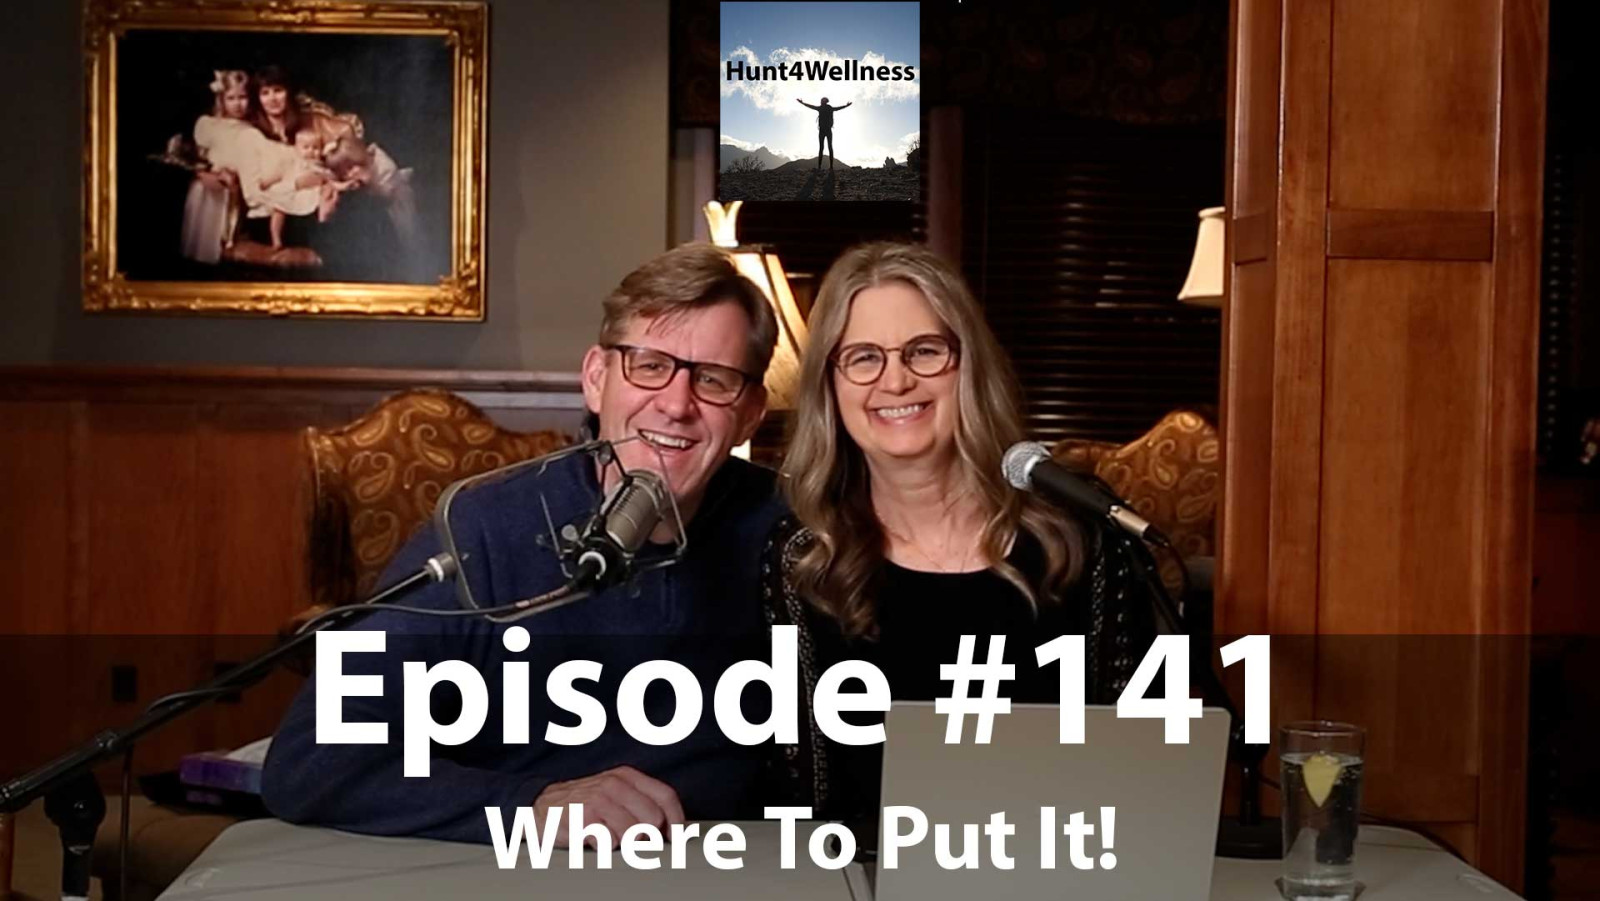 Episode #141 - Where To Put It!